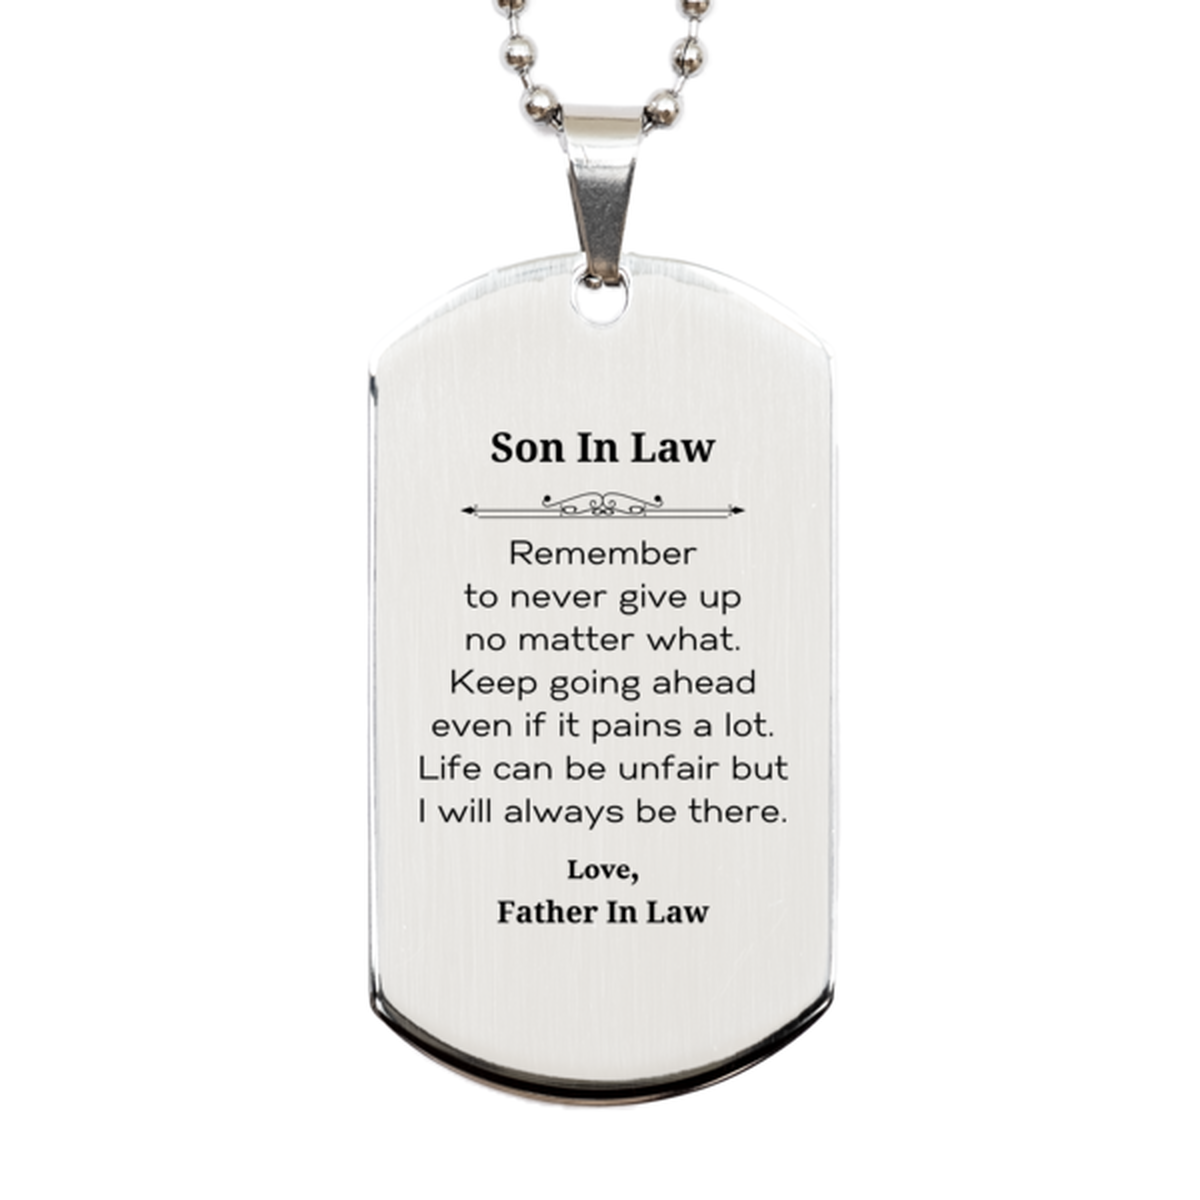 Son In Law Motivational Gifts from Father In Law, Remember to never give up no matter what, Inspirational Birthday Silver Dog Tag for Son In Law